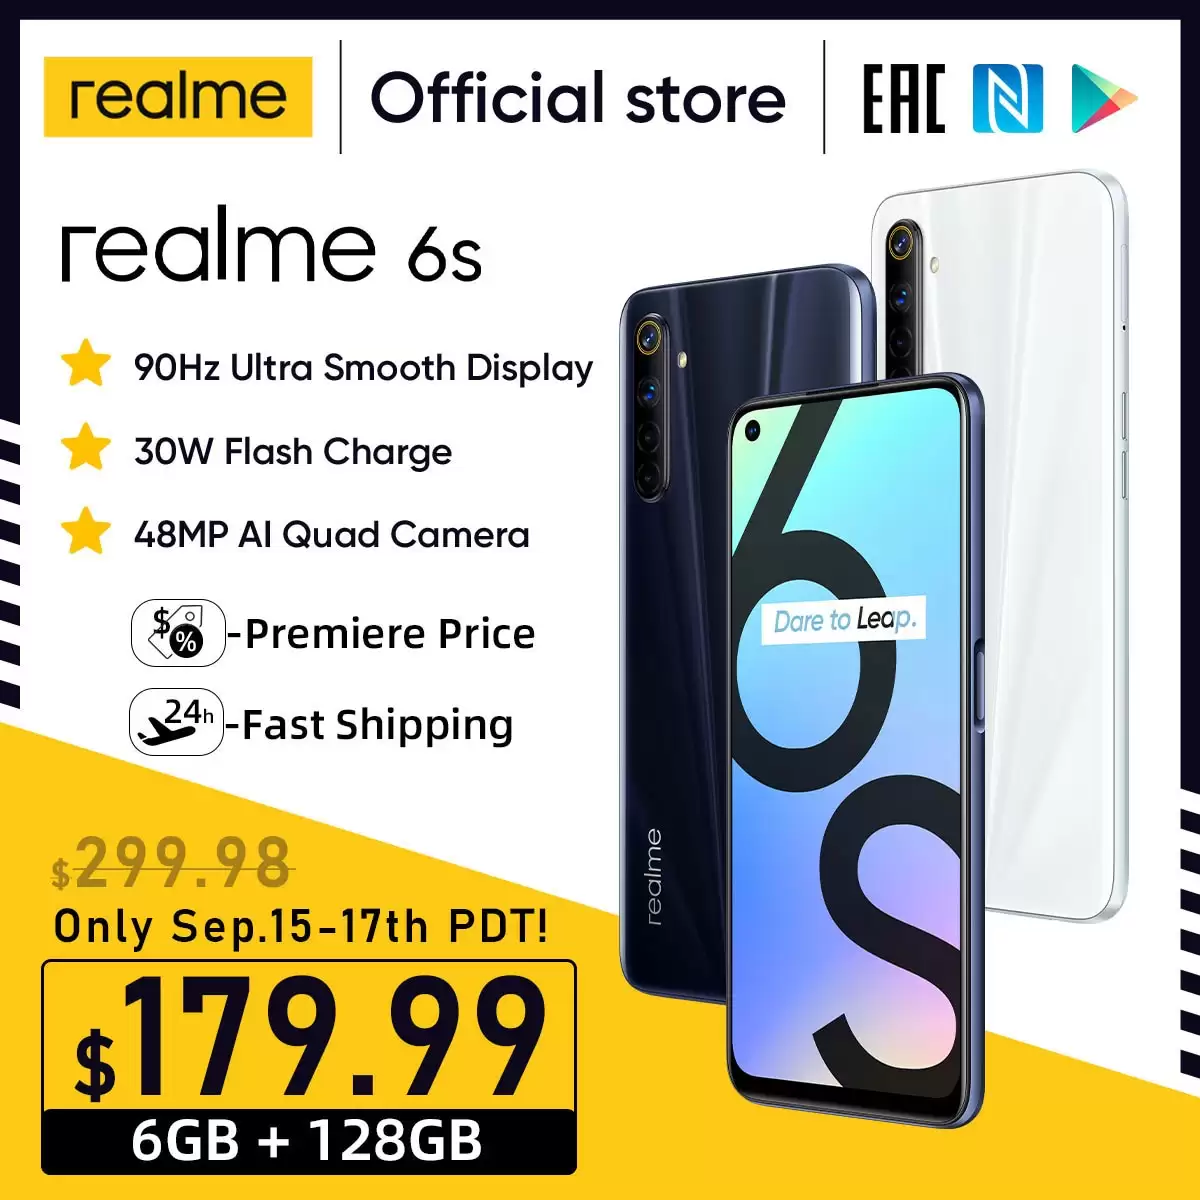 Get Extra $30 Discount On Smartphone Realme 6s With This Discount Coupon At Aliexpress